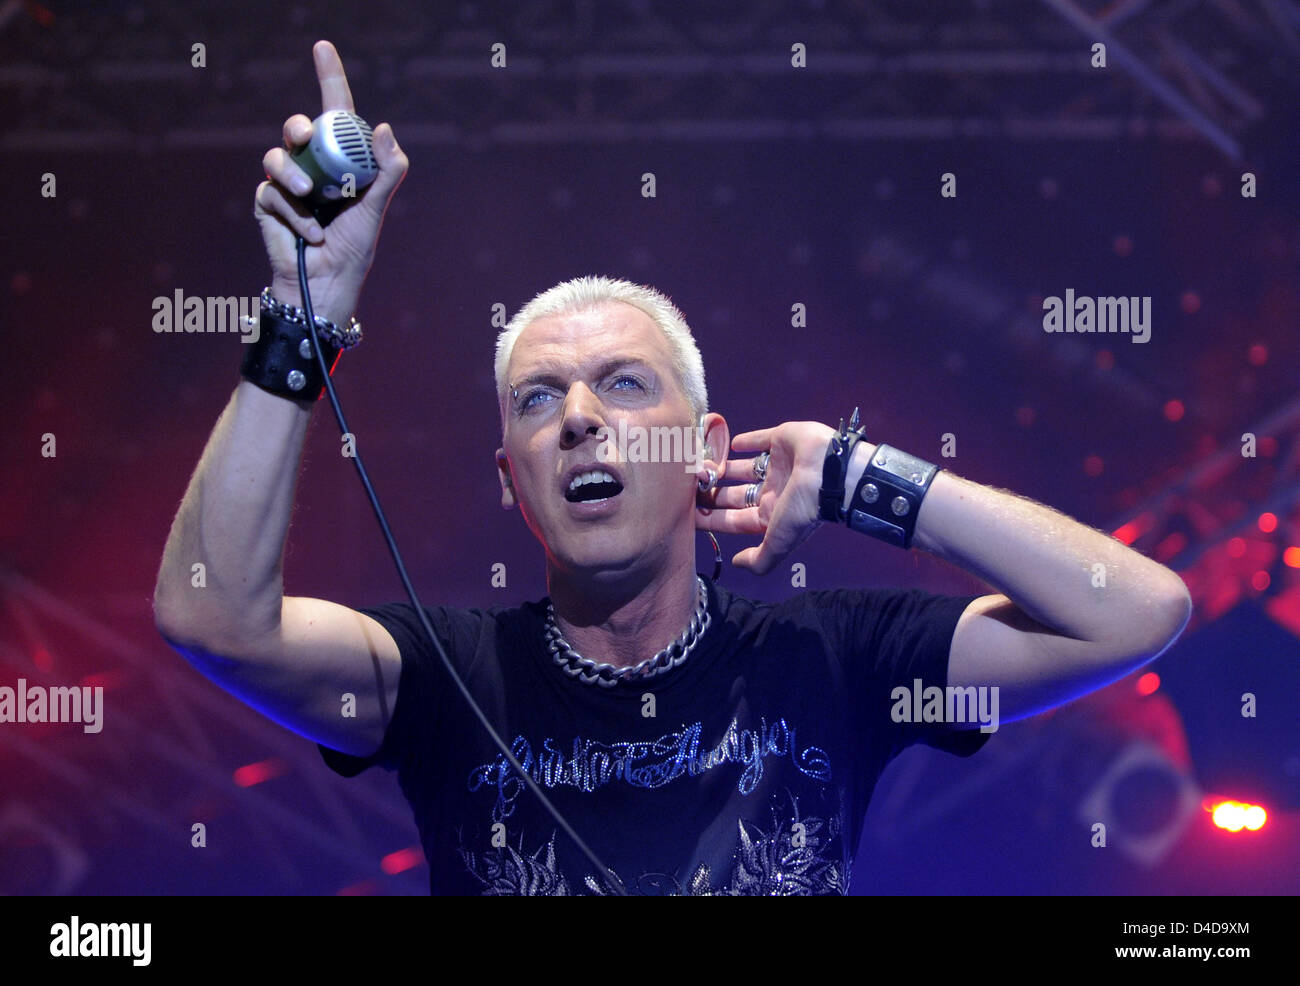 H.P. Baxxter, frontman of the German techno band Scooter, performs at the  concert at Columbiahalle in Berlin, Germany, 06 April 2008. In August 2007,  Scooter had their 20th top ten hit in